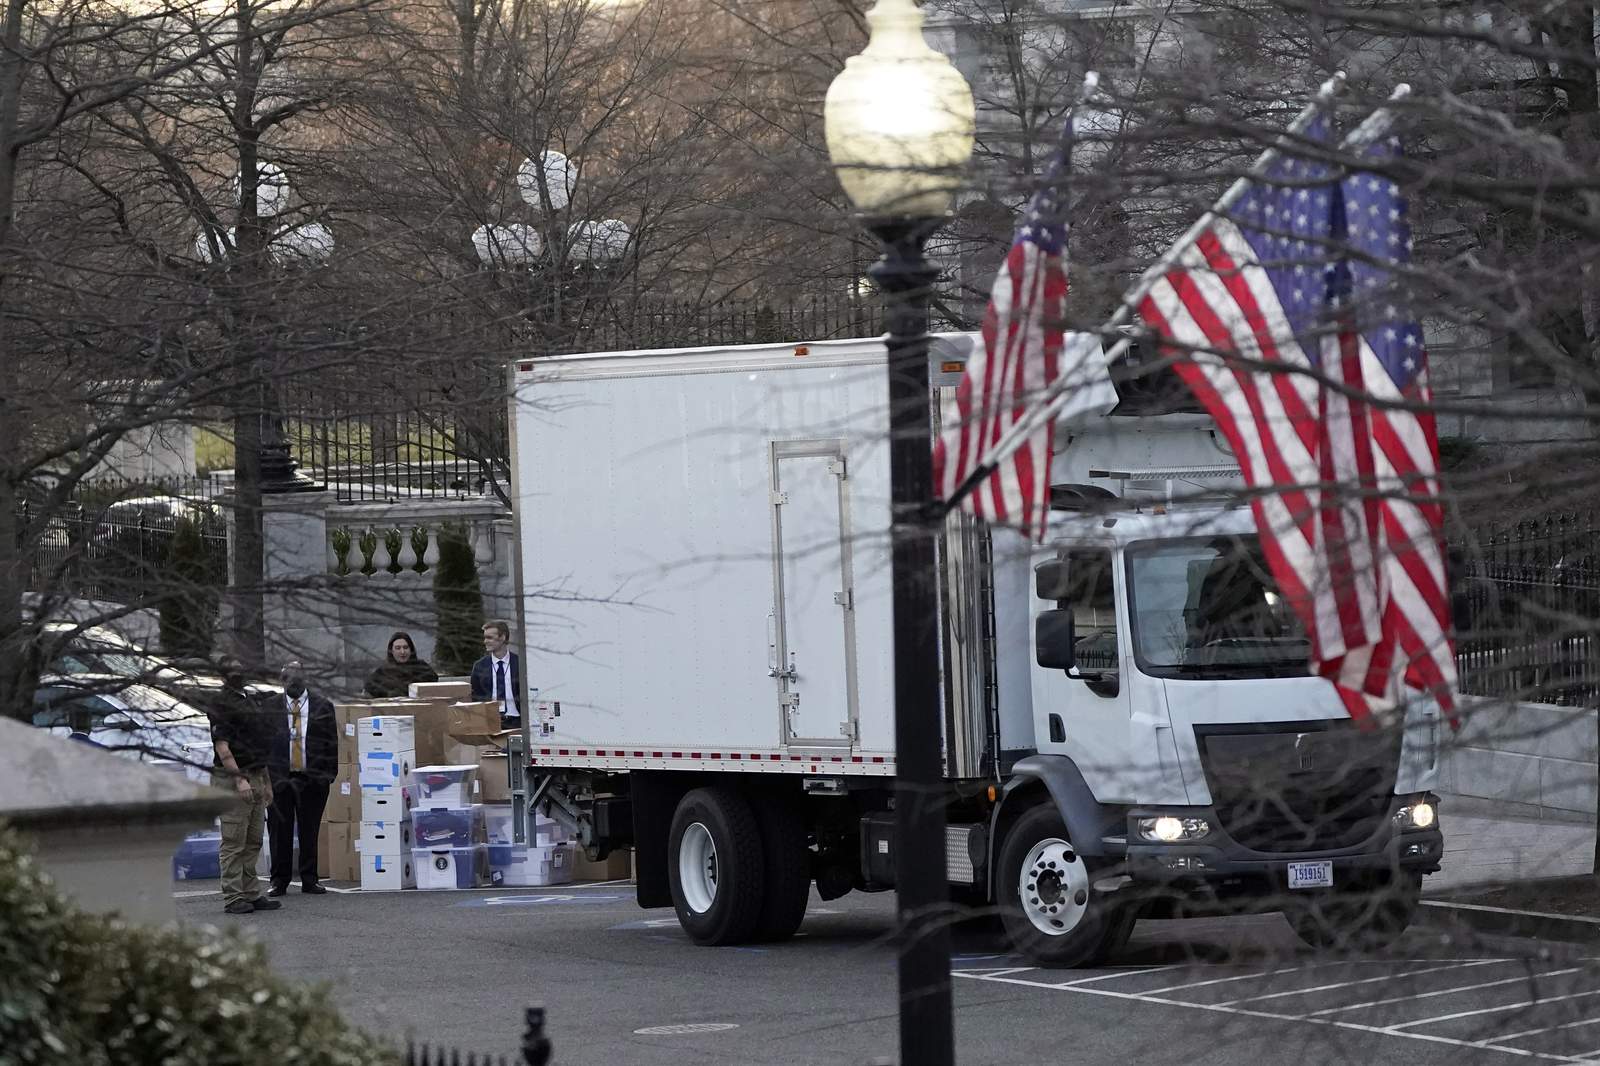 Inauguration Day also is move in/out day at the White House